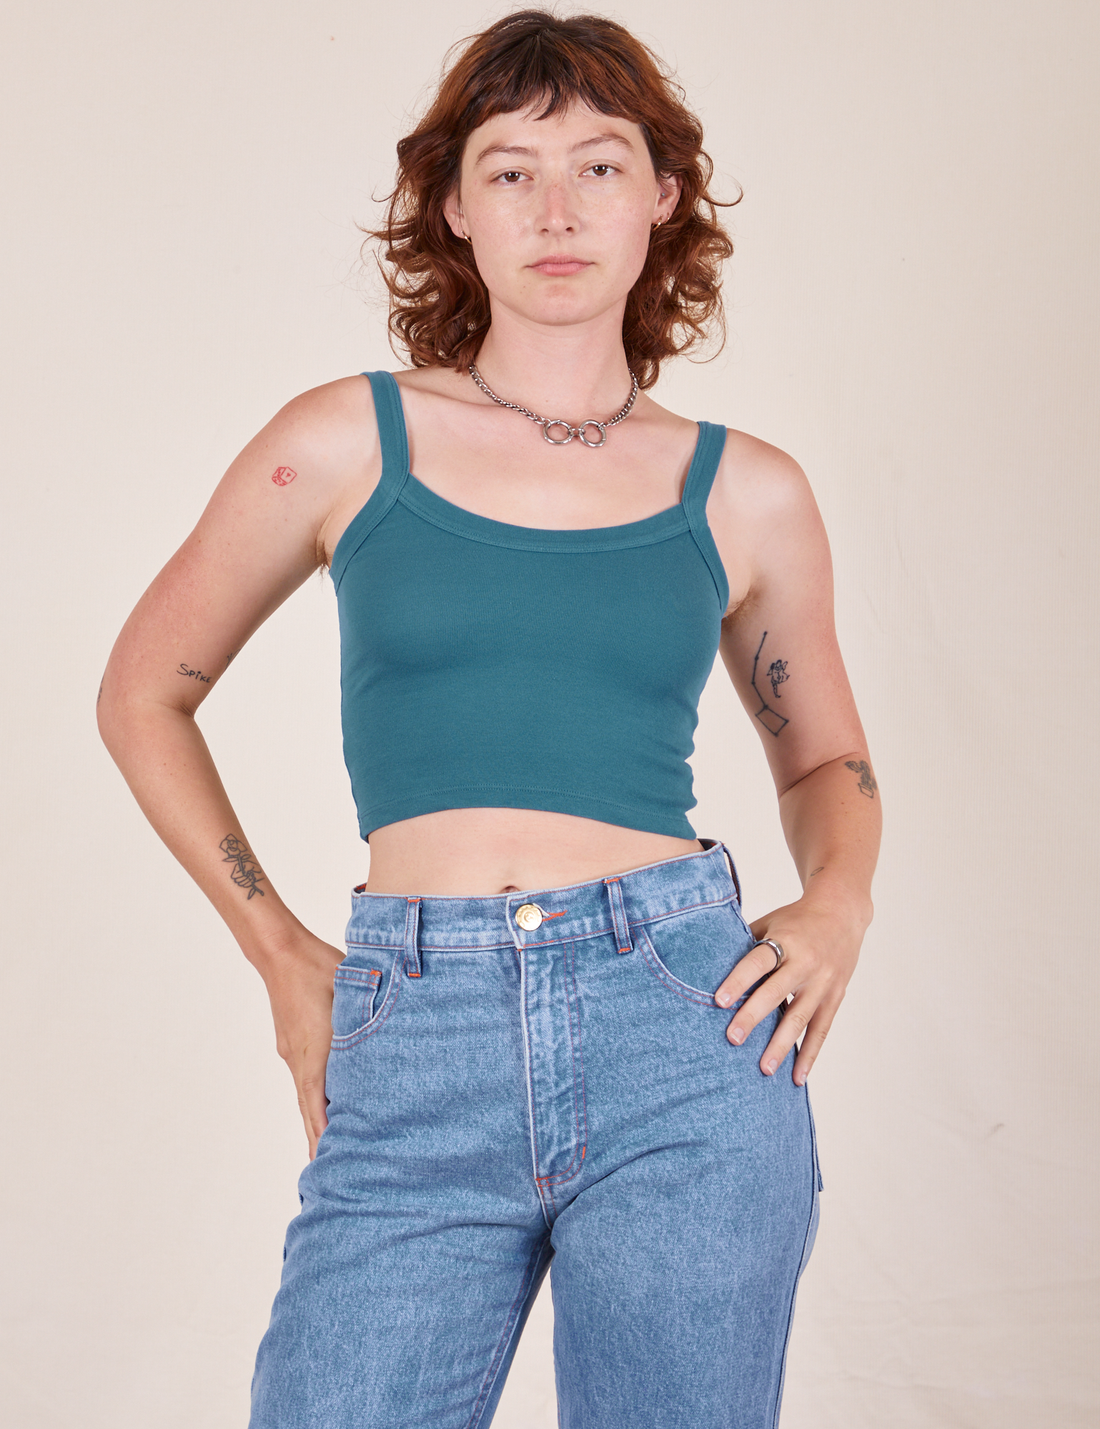 Alex is wearing Cropped Cami in Marine Blue and light wash Frontier Jeans